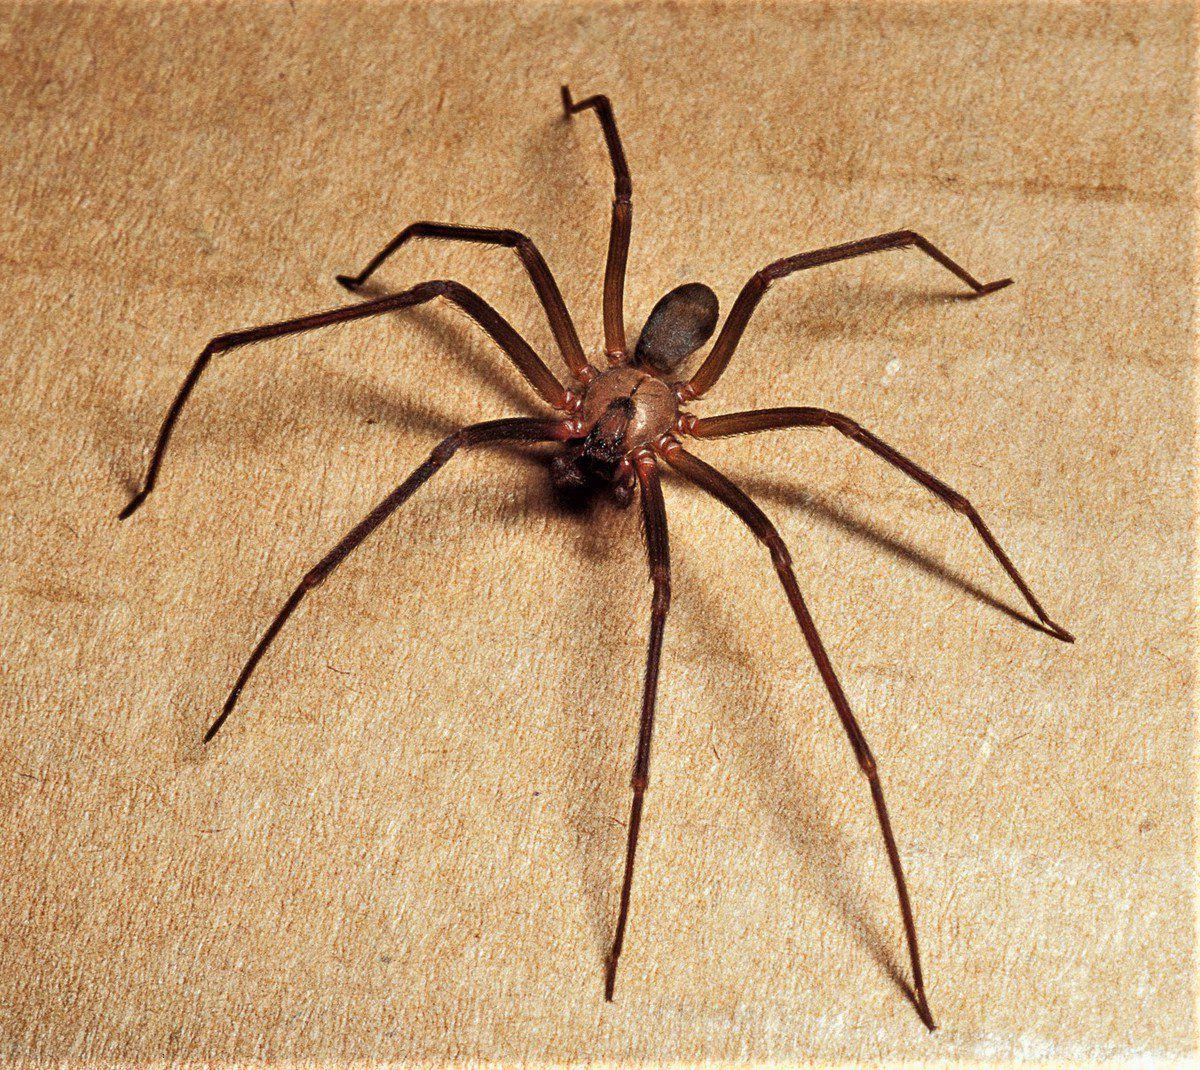 Dangerous brown recluse spider that has been found in a home